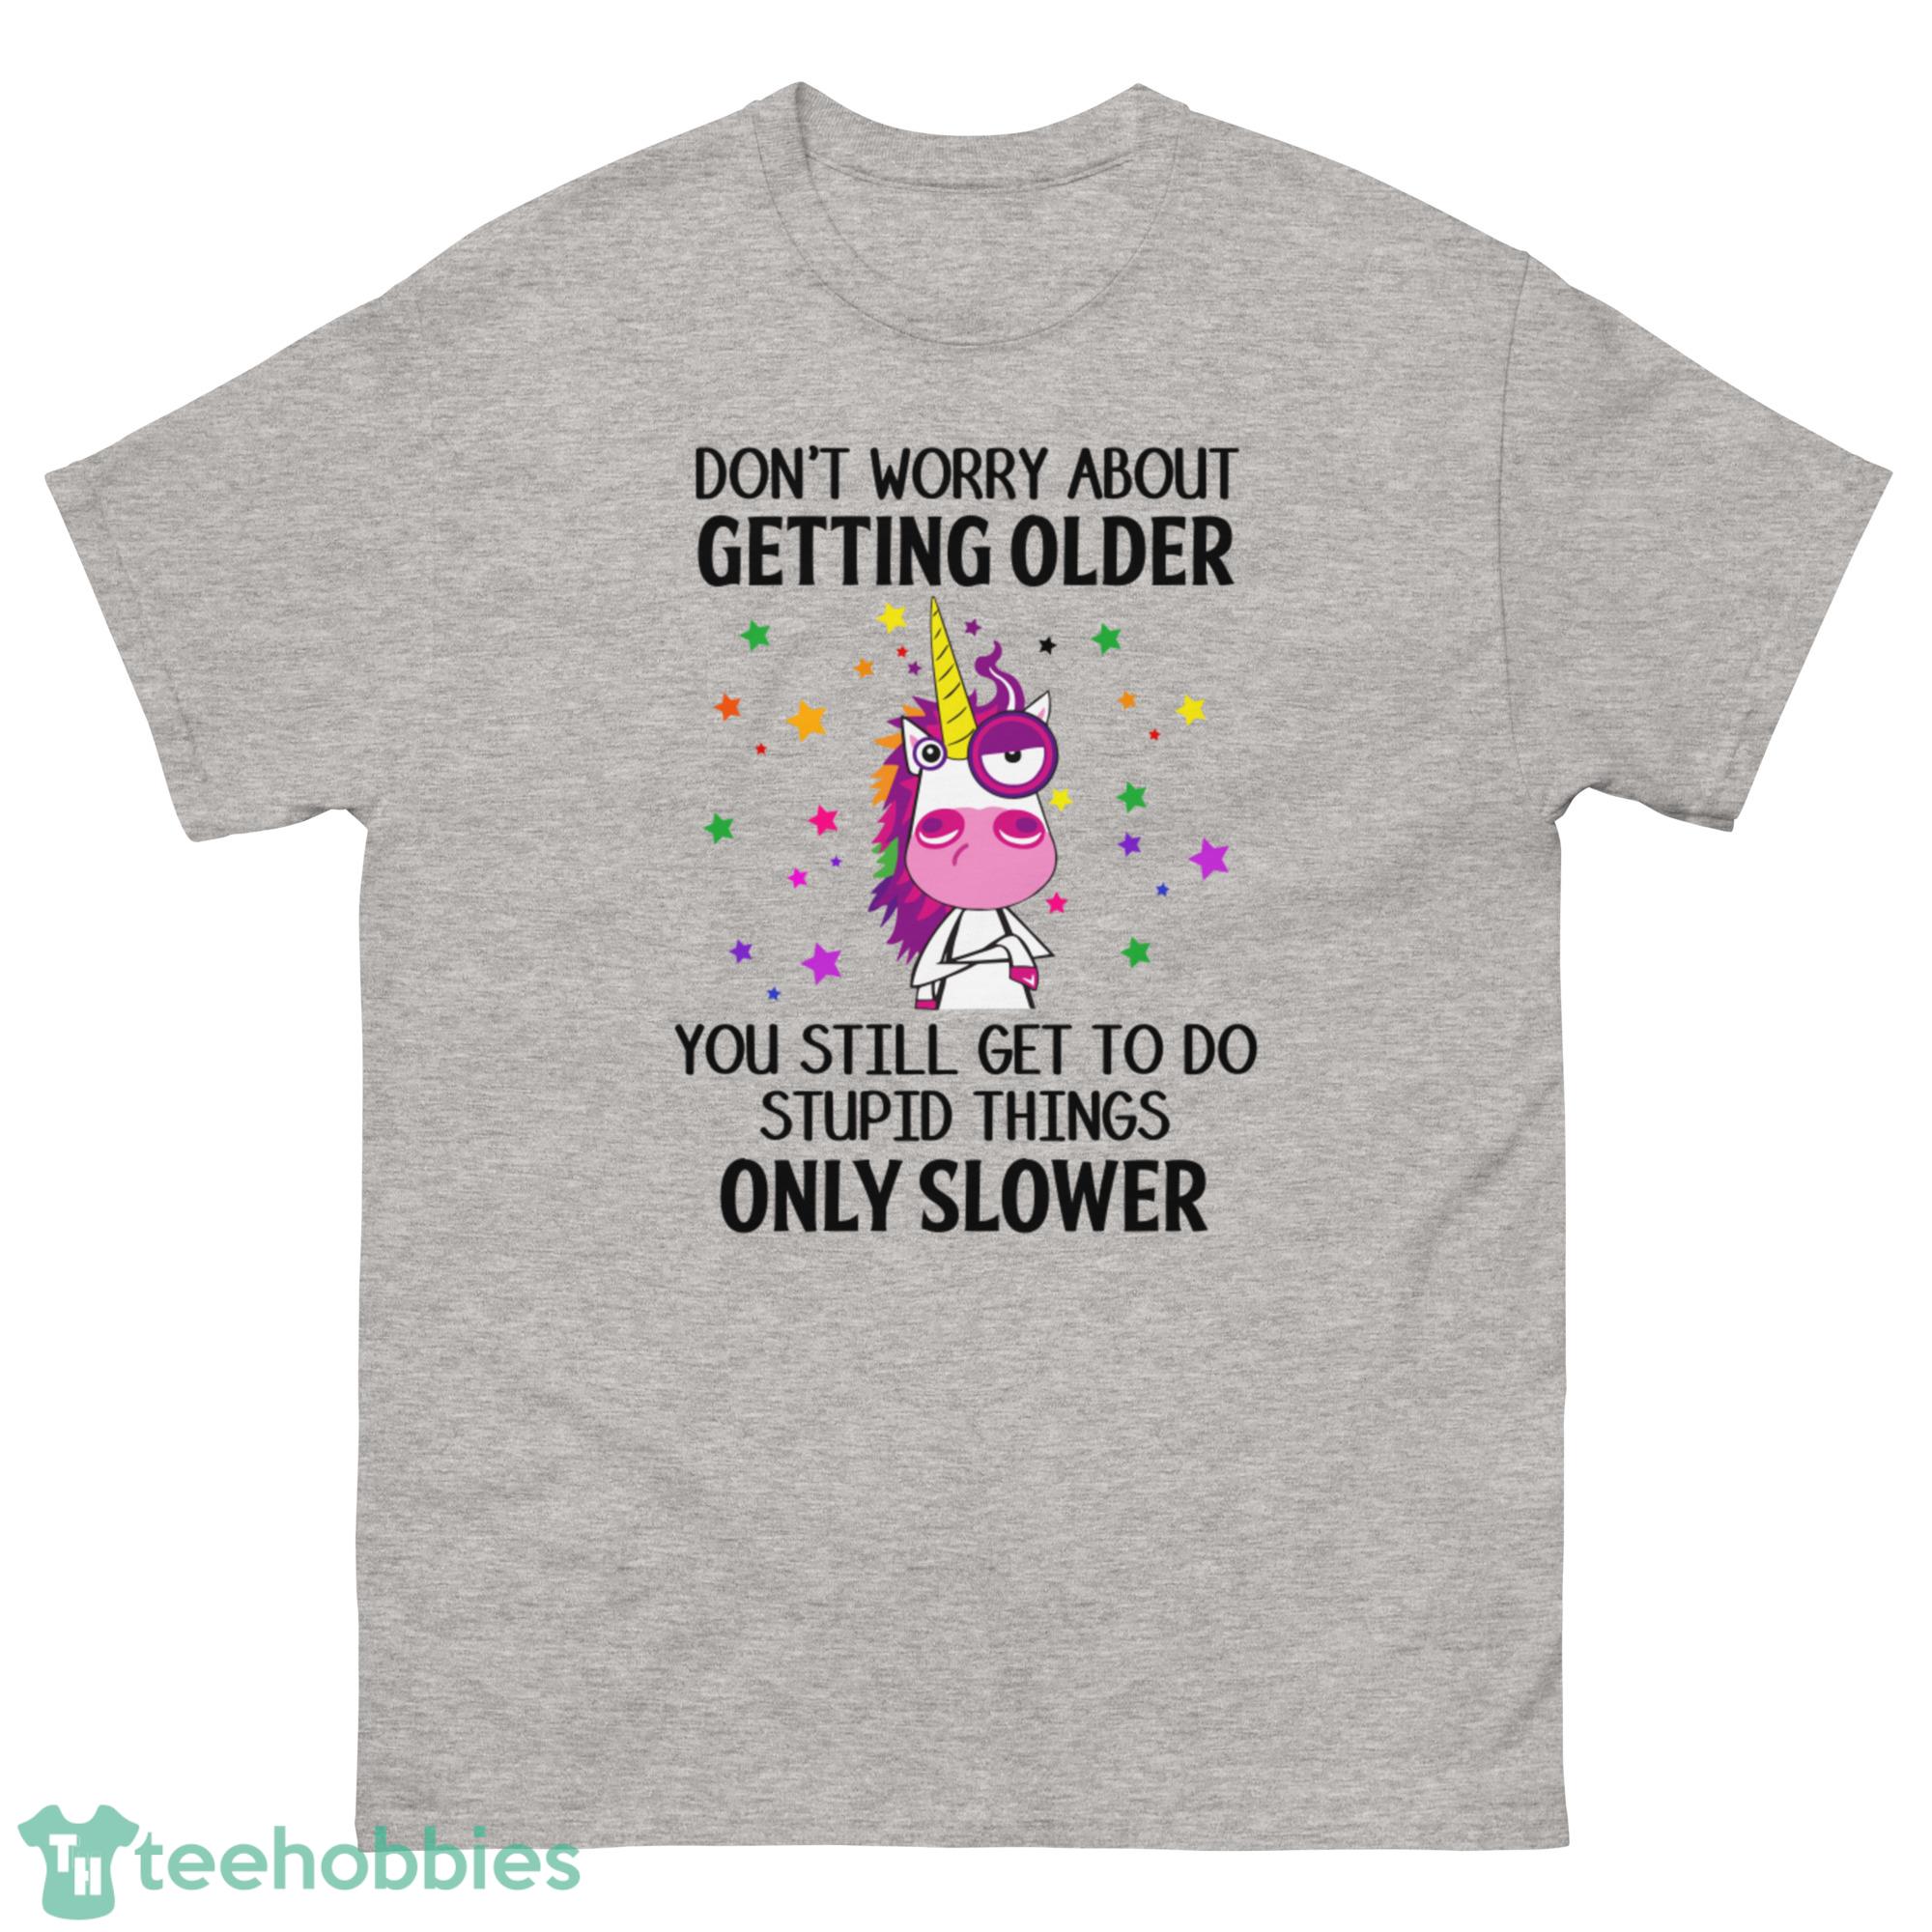 Grumpy Unicorn, Dont Worry About Getting Older You Still Get To Do Stupid Things Only Slower Shirt - G500 Men’s Classic T-Shirt